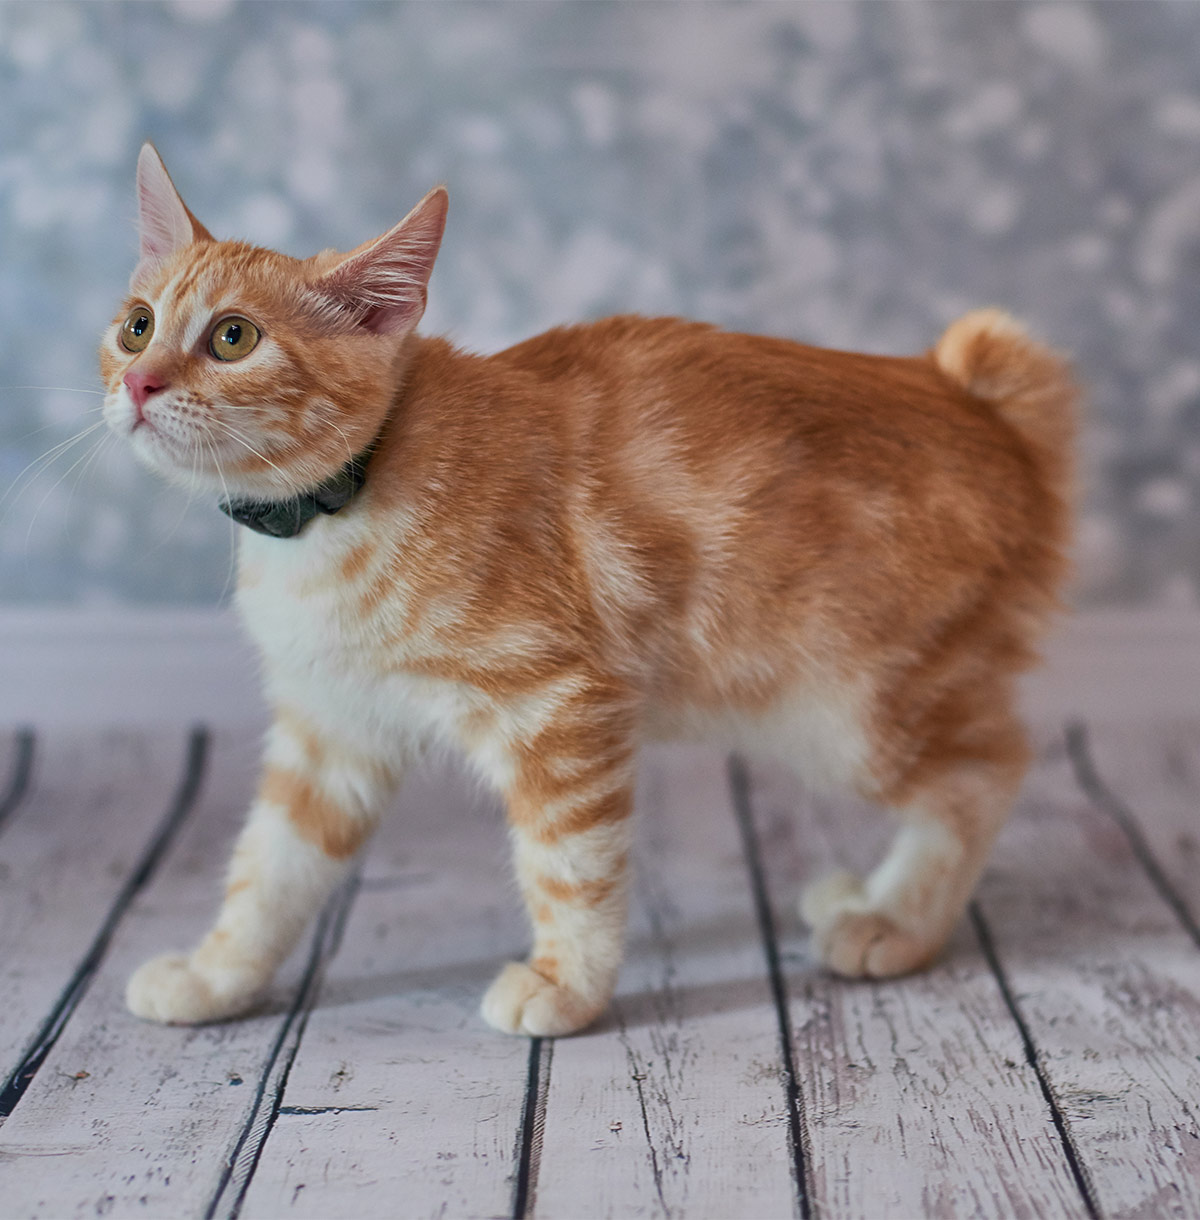 American Bobtail Cat Are They The Best Short Tailed Pet Kitty?